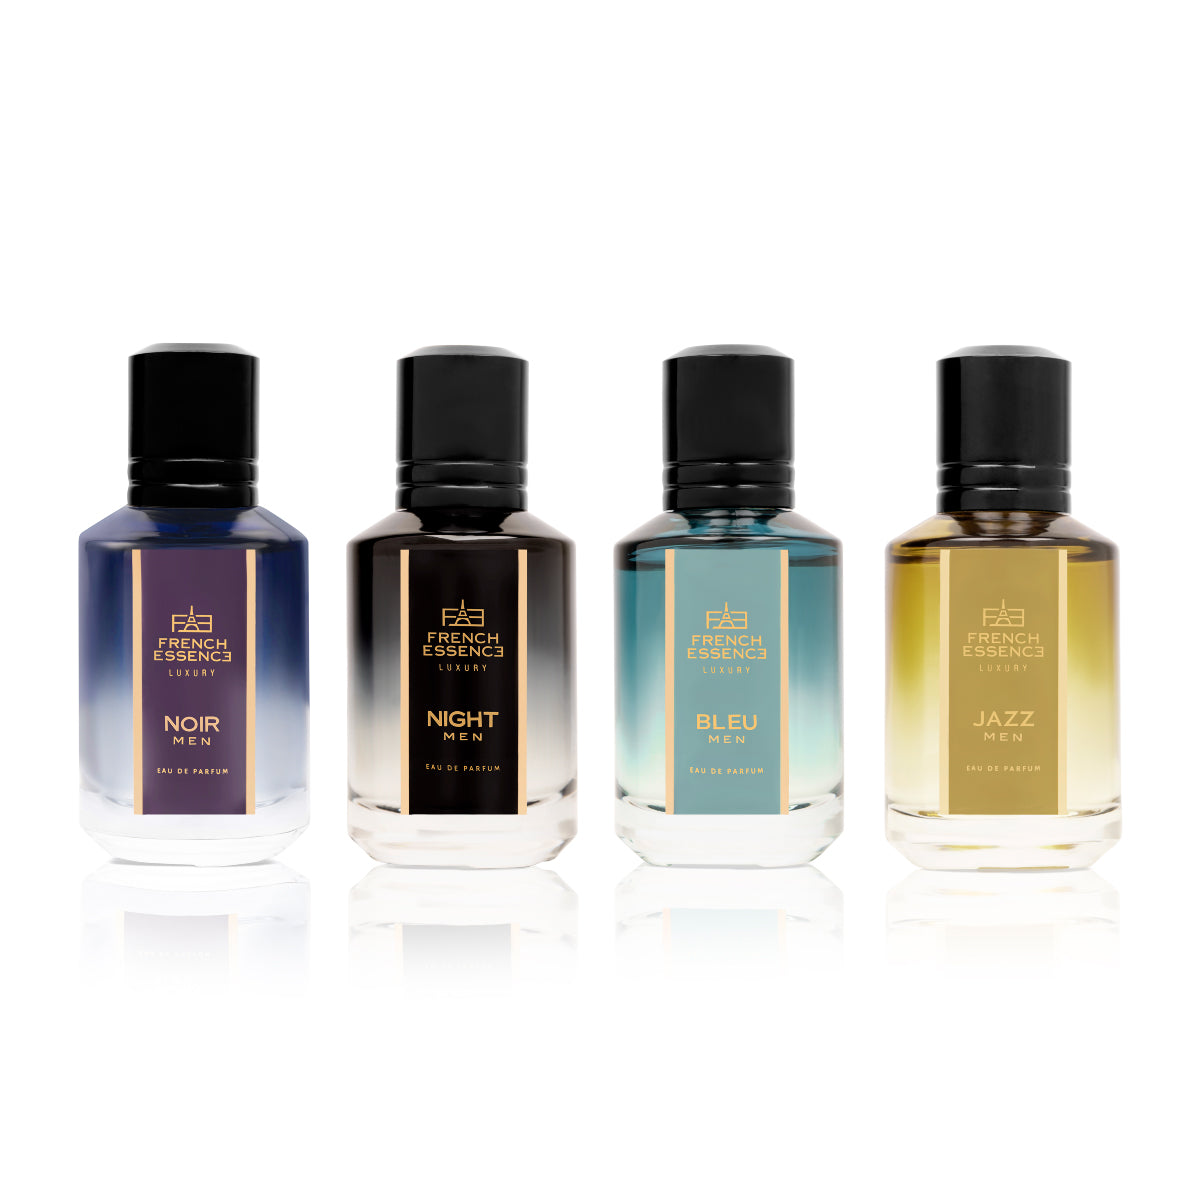 Men's Luxury Musk & Spicy French Perfume Gift Set